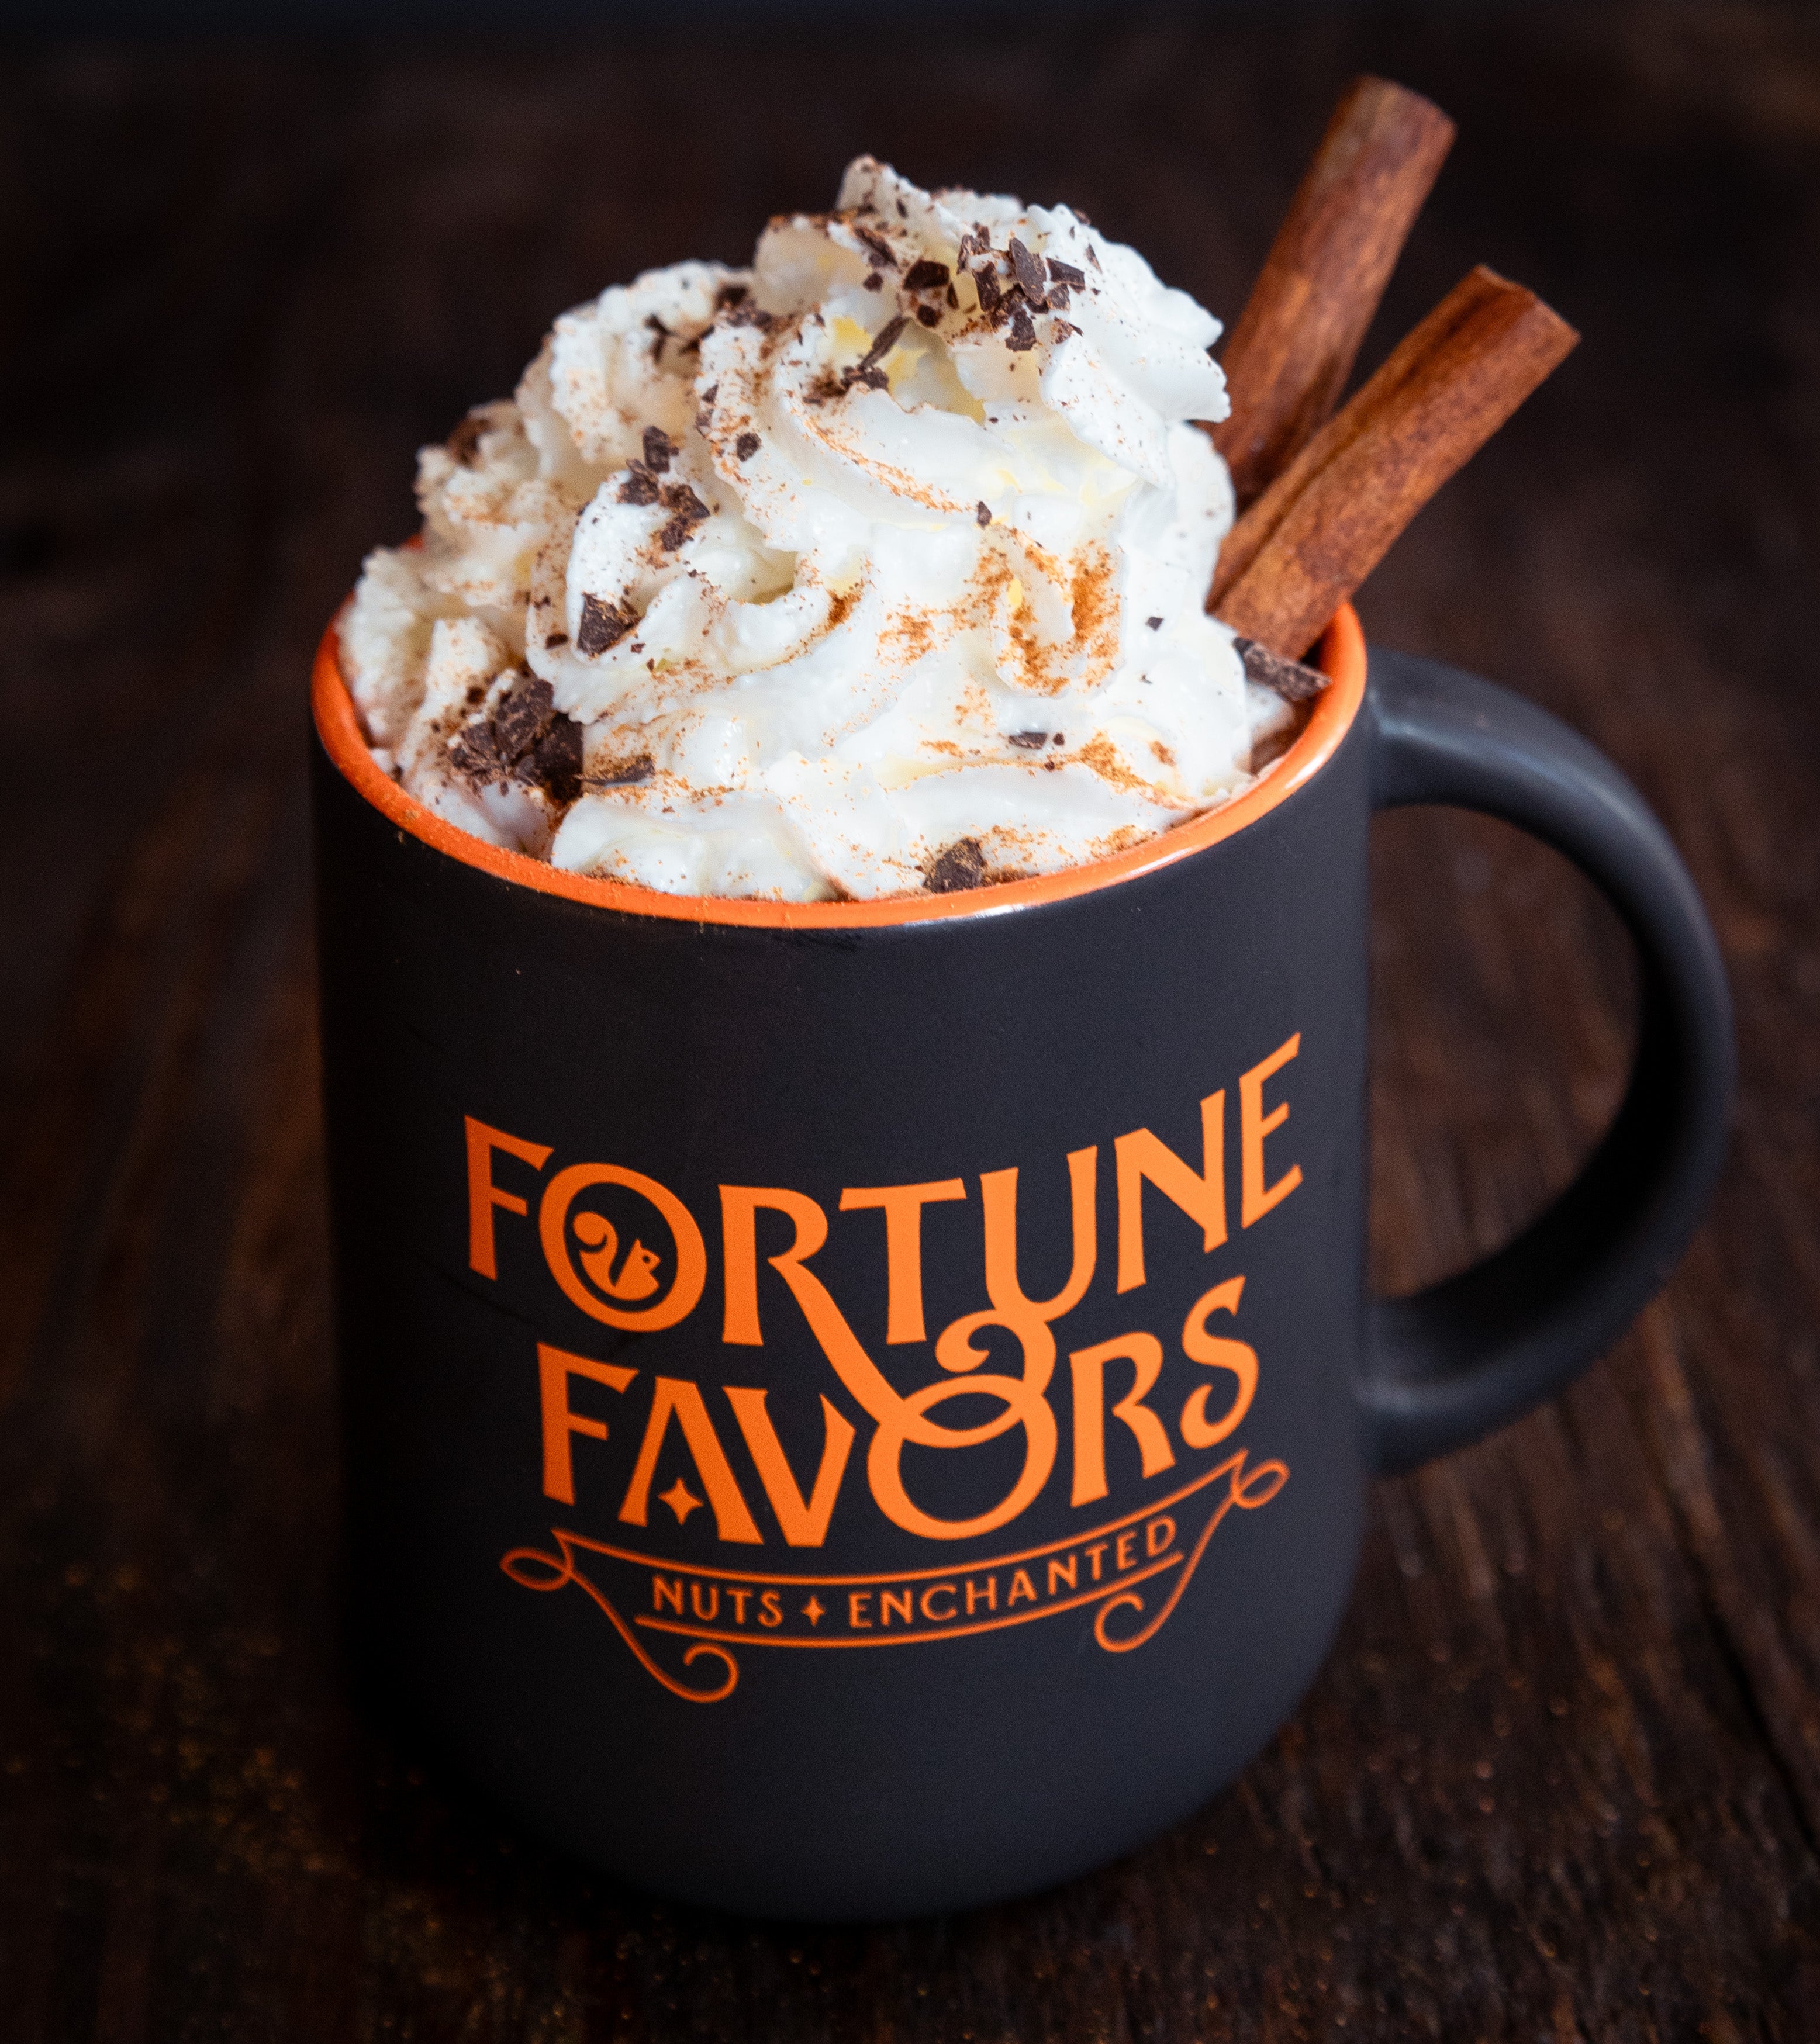 Fortune Favors branded coffee mug with whipped cream and cinnamon sticks garnish.